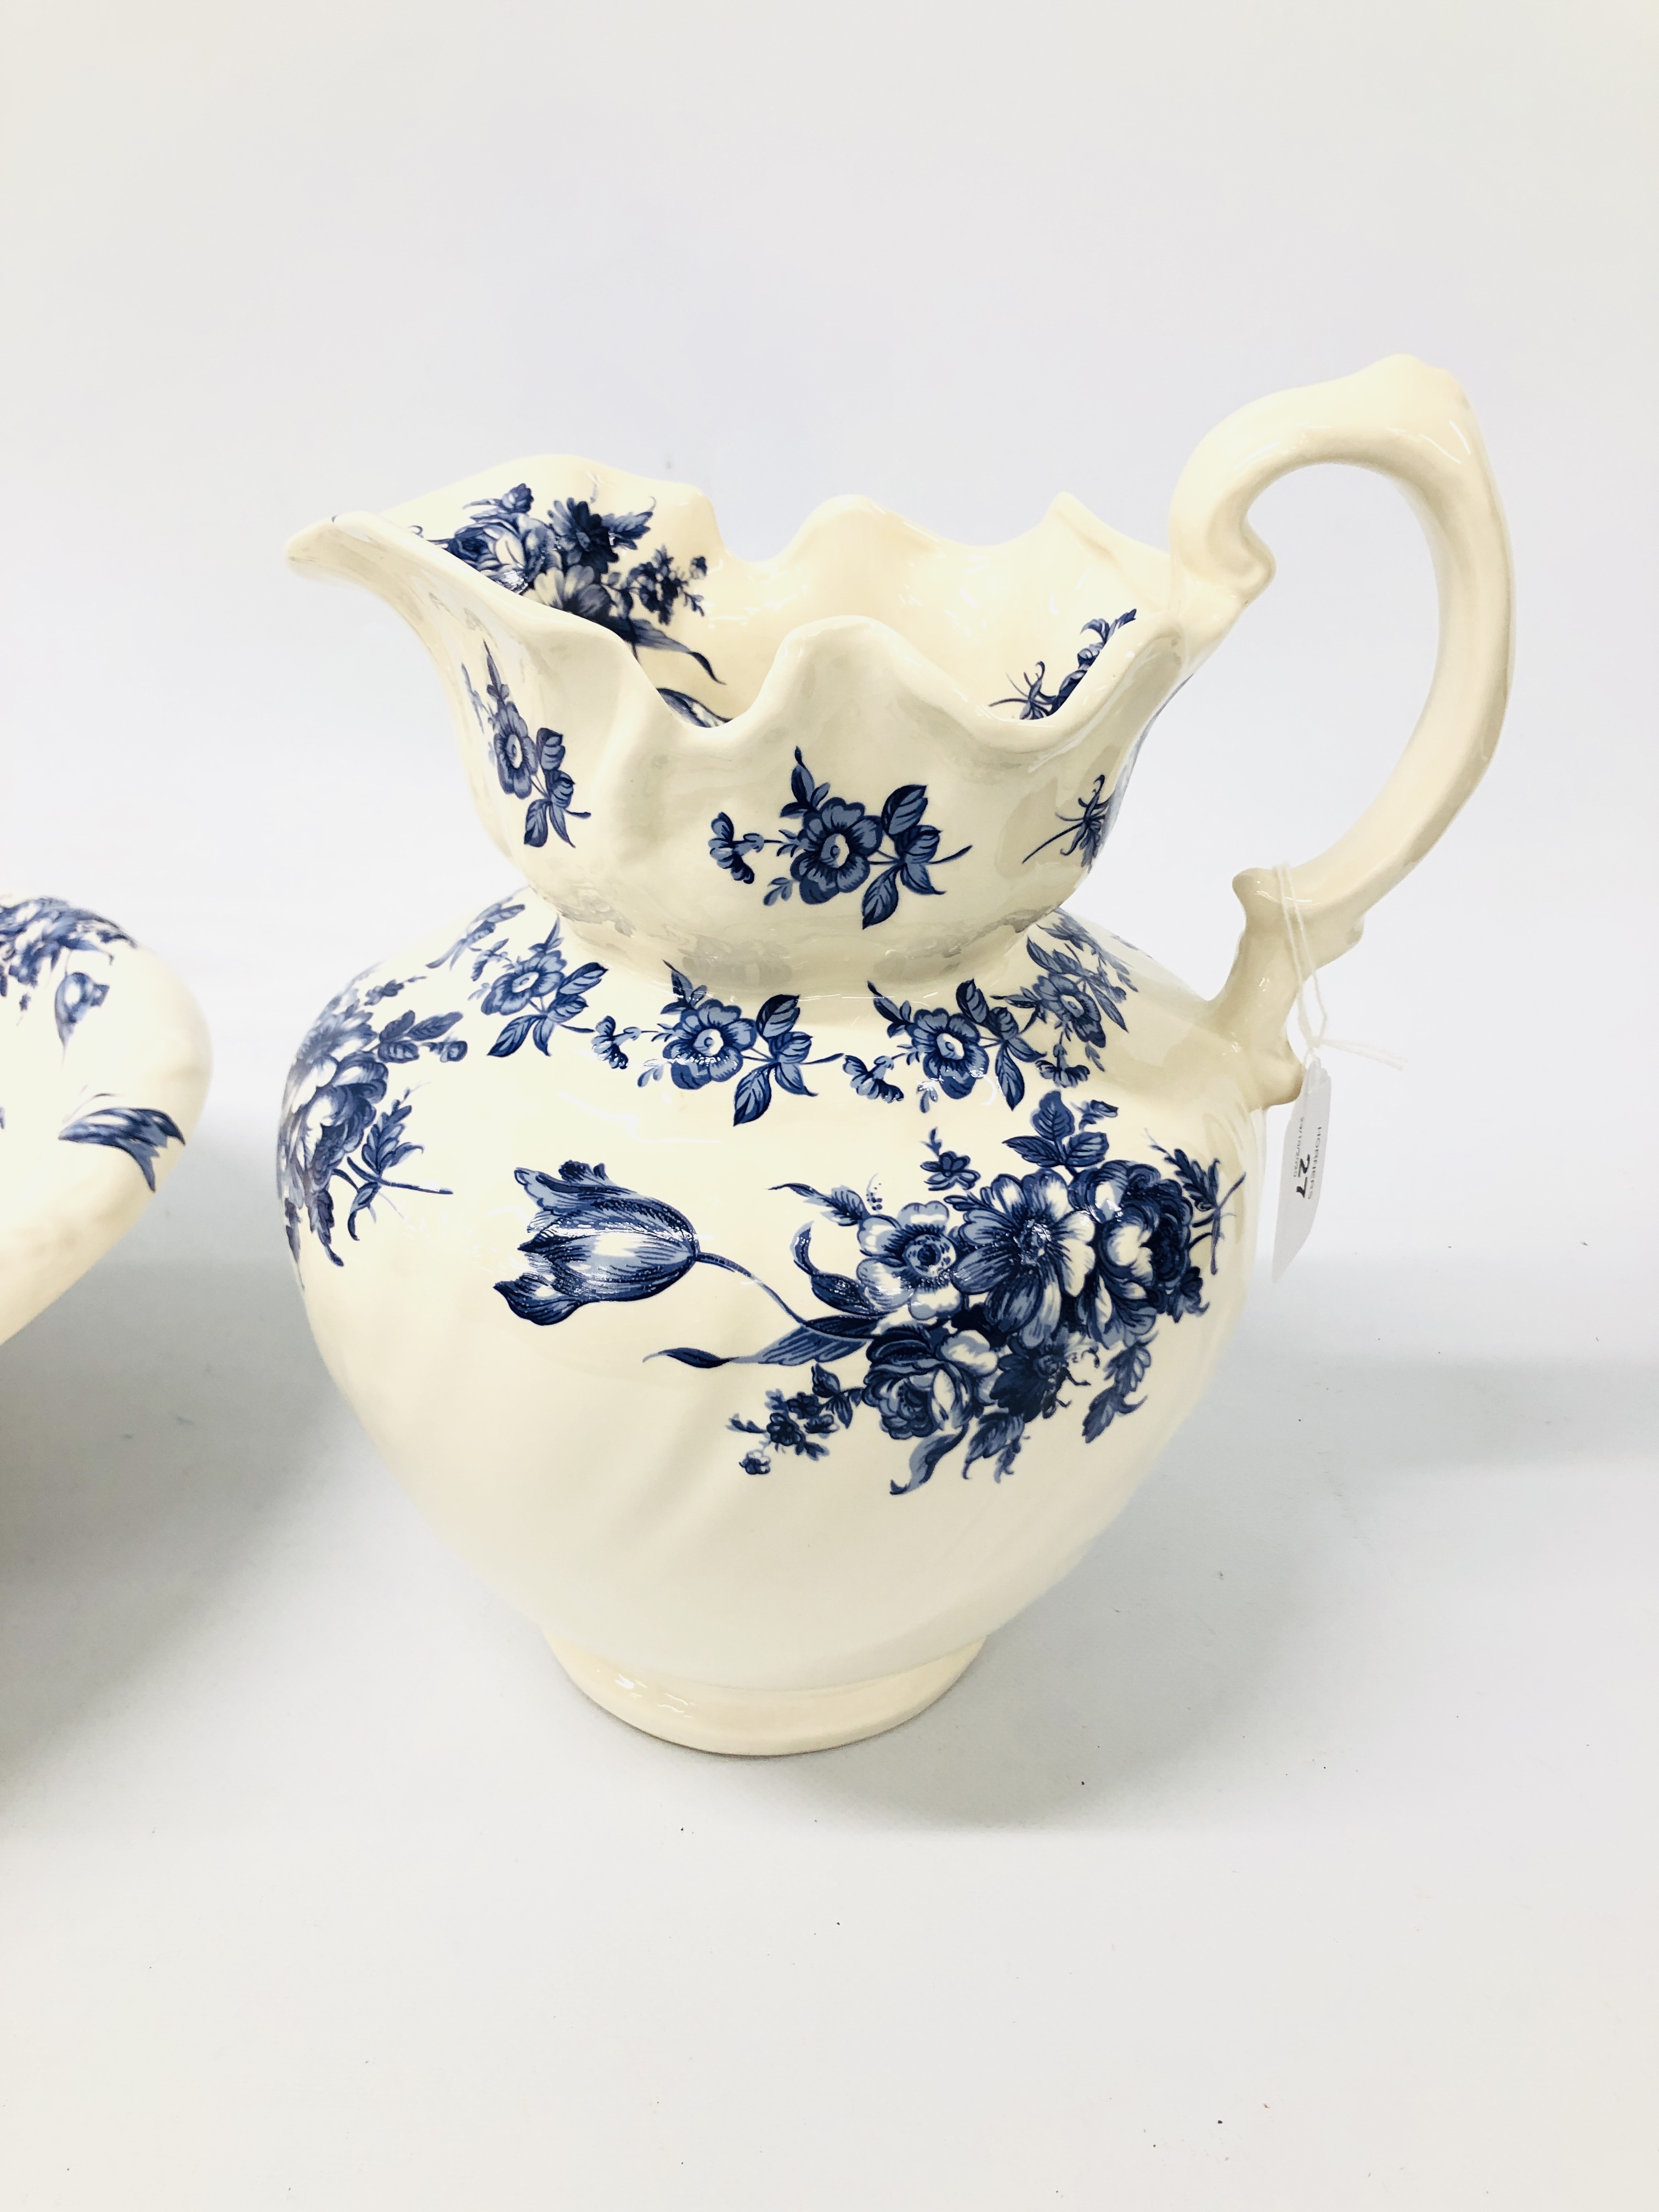 SPODE ITALIAN BLUE AND WHITE JUG AND BOWL SET - Image 2 of 8